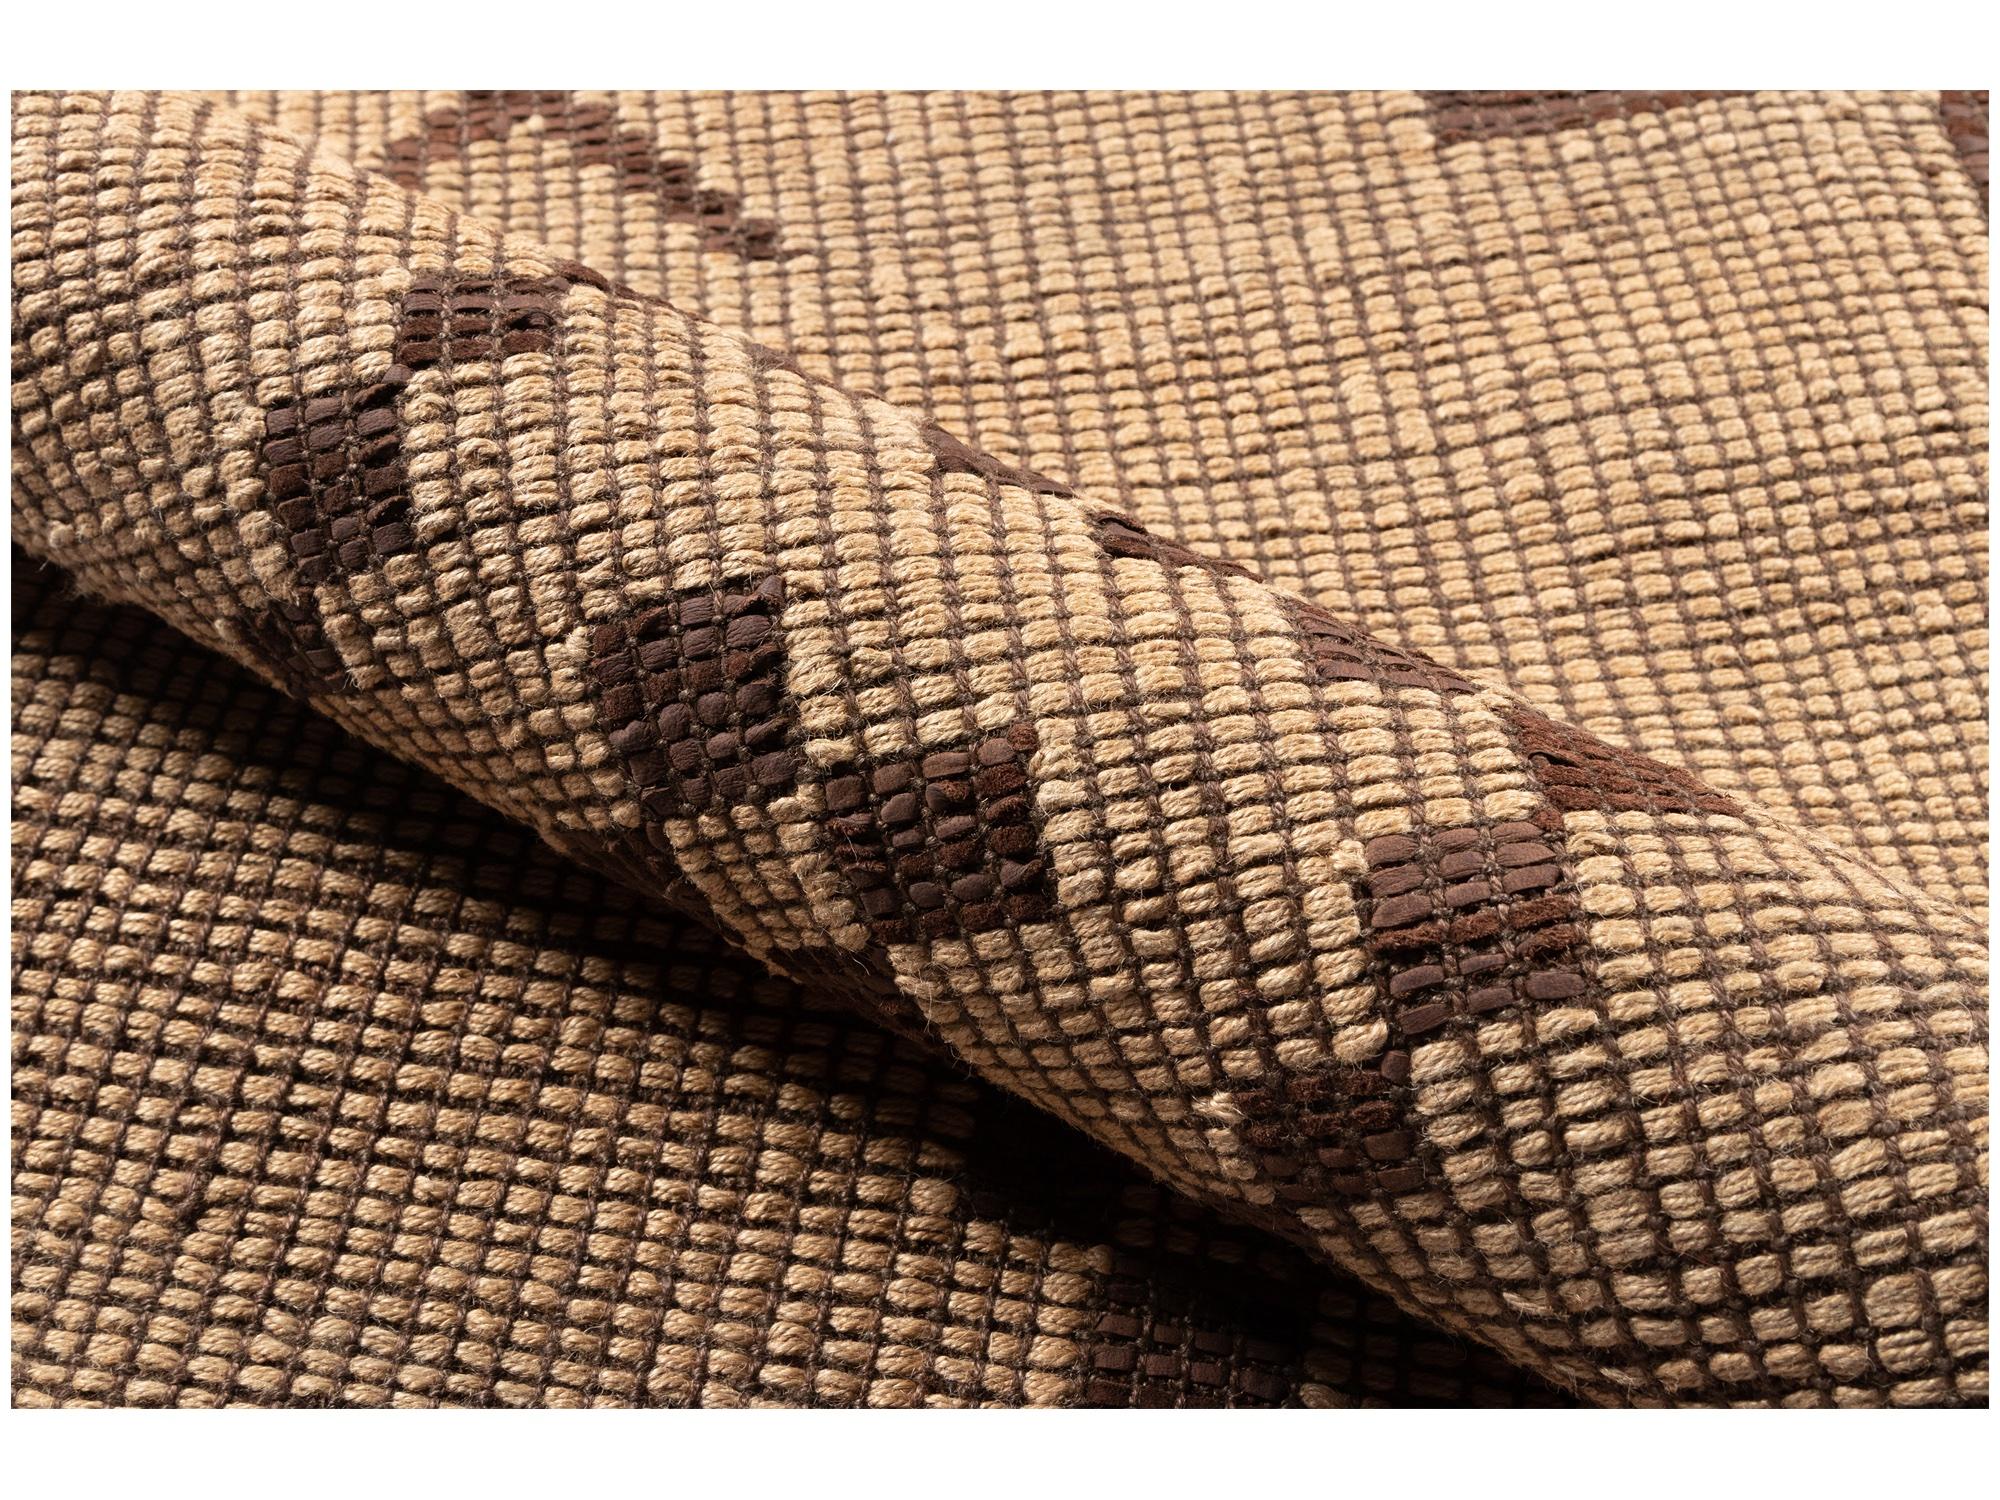 A modern twist on the traditional Tuareg mats, the Tugart Collection celebrates elegance in minimalism. Historically built to withstand wear, the handwoven leather and jute construction ages gracefully. A soft-to-hand texture not often found with